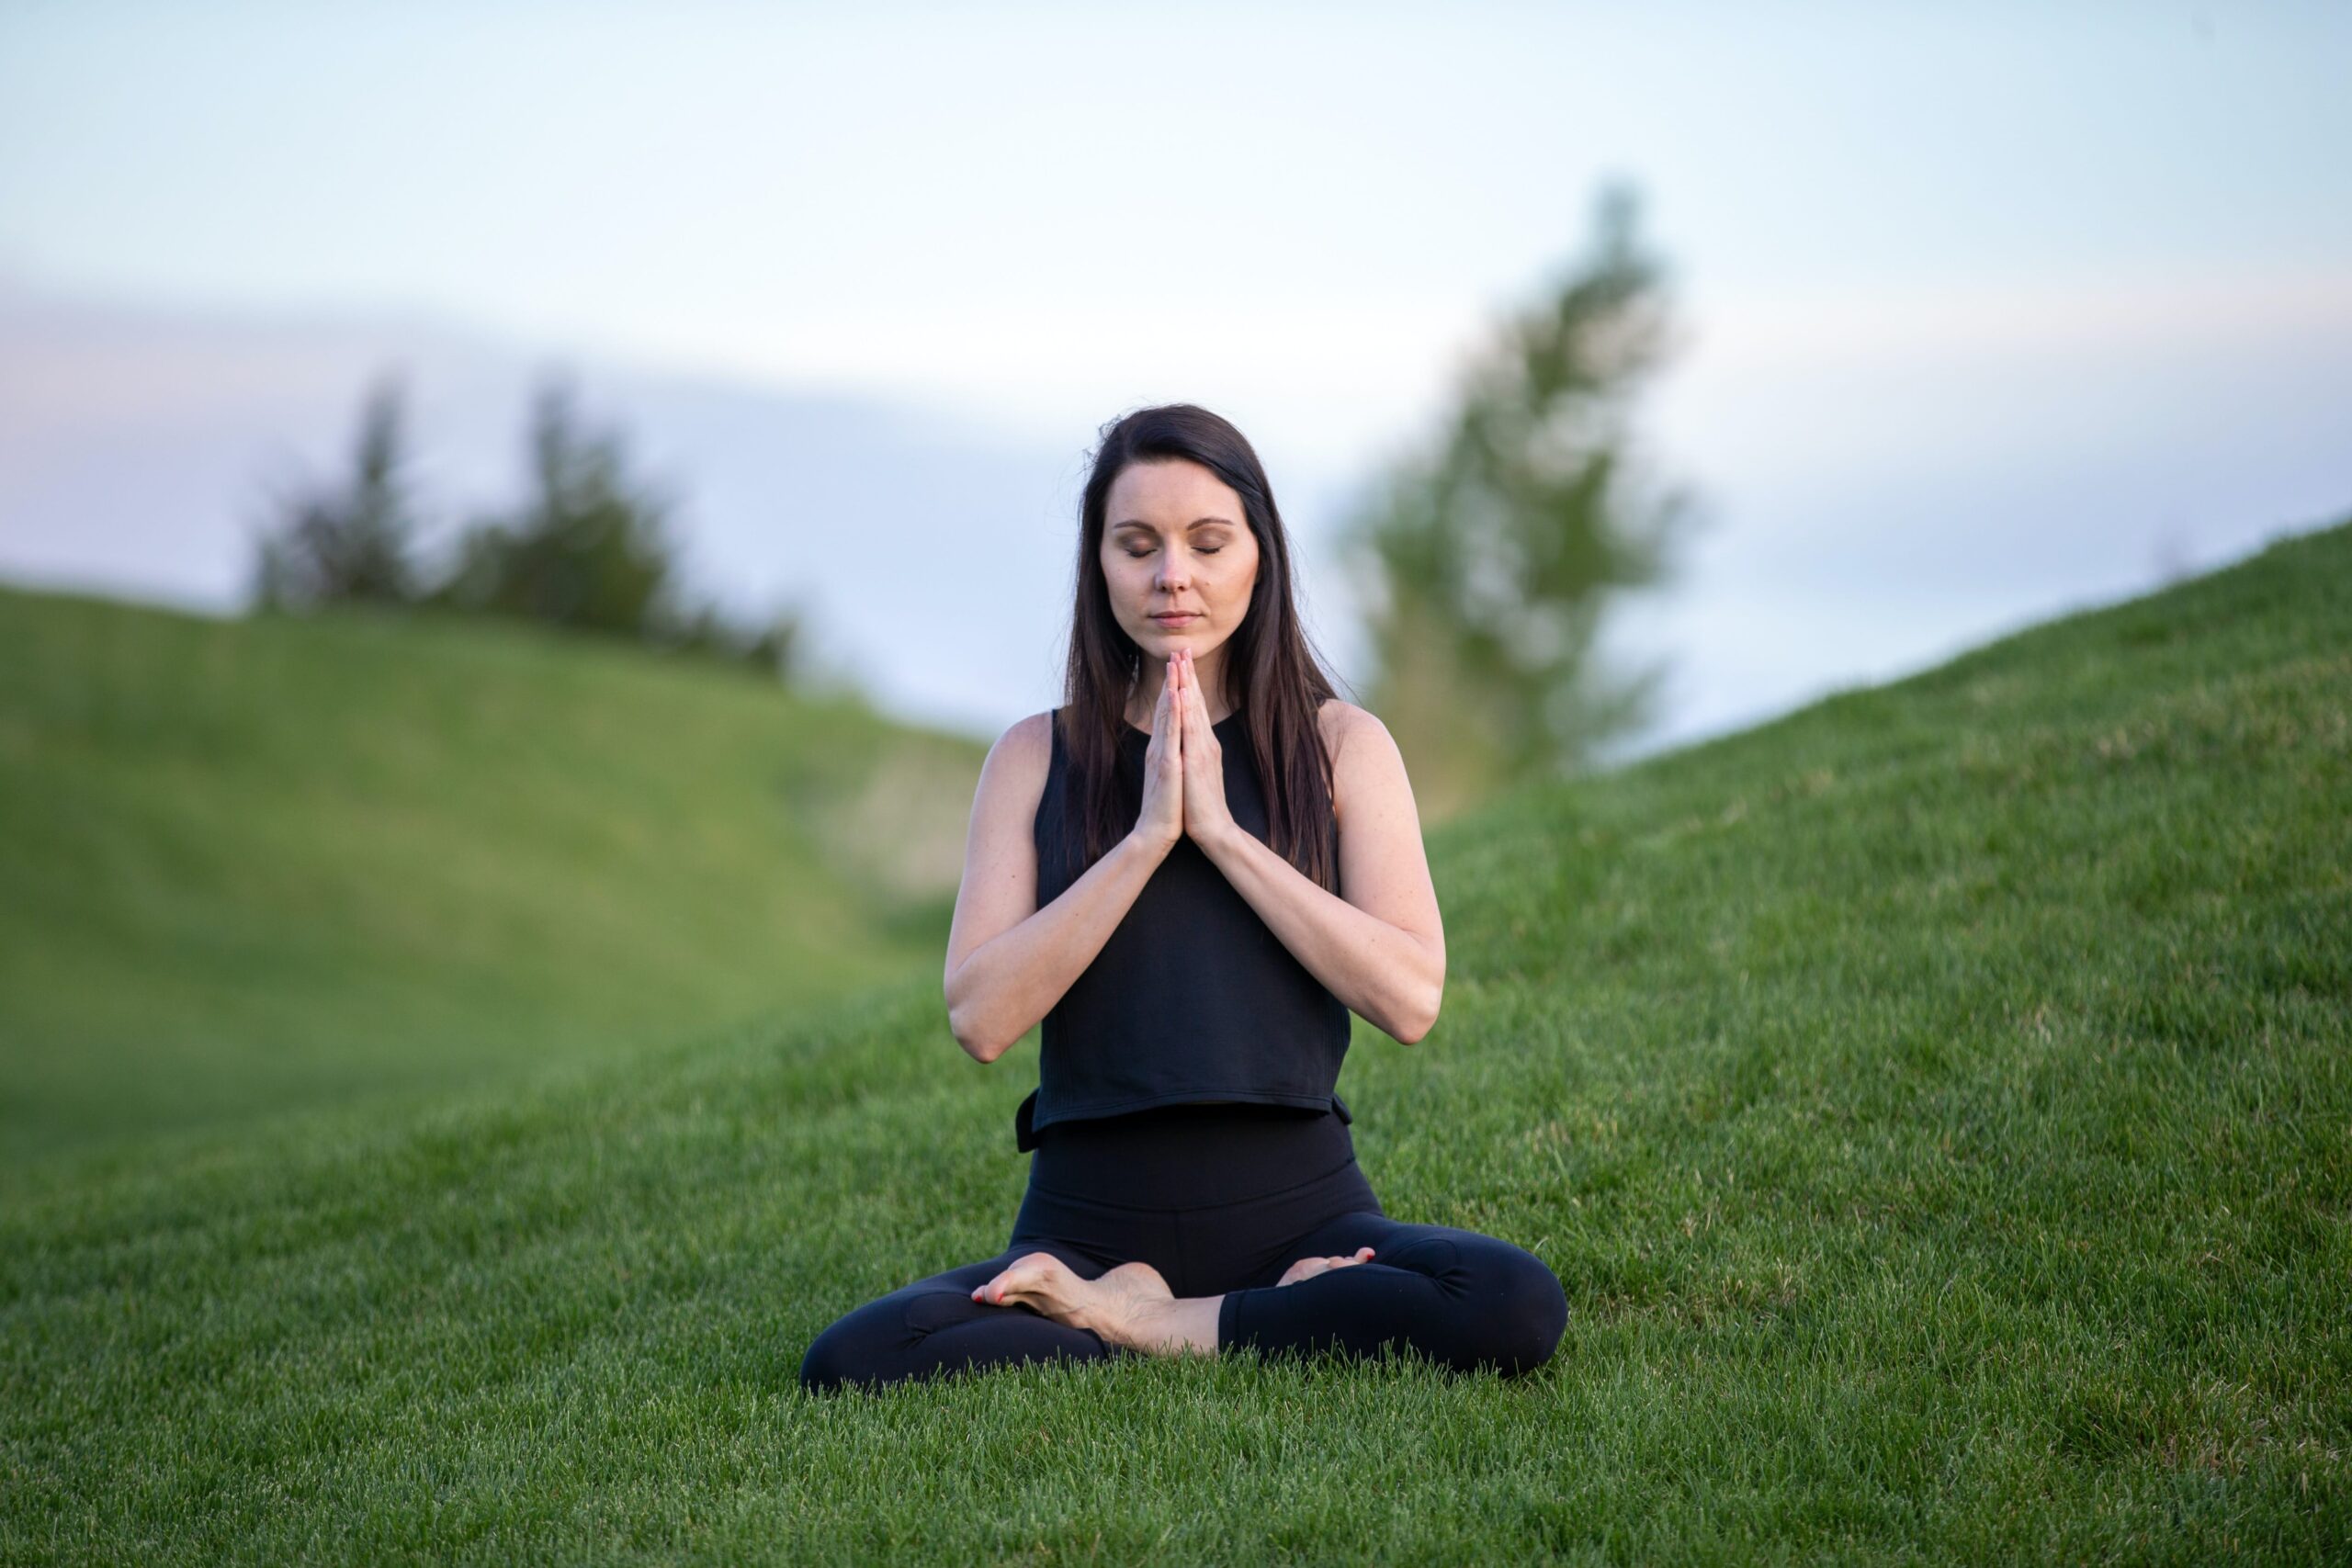 Meditating person focusing on deep breathing for mindfulness